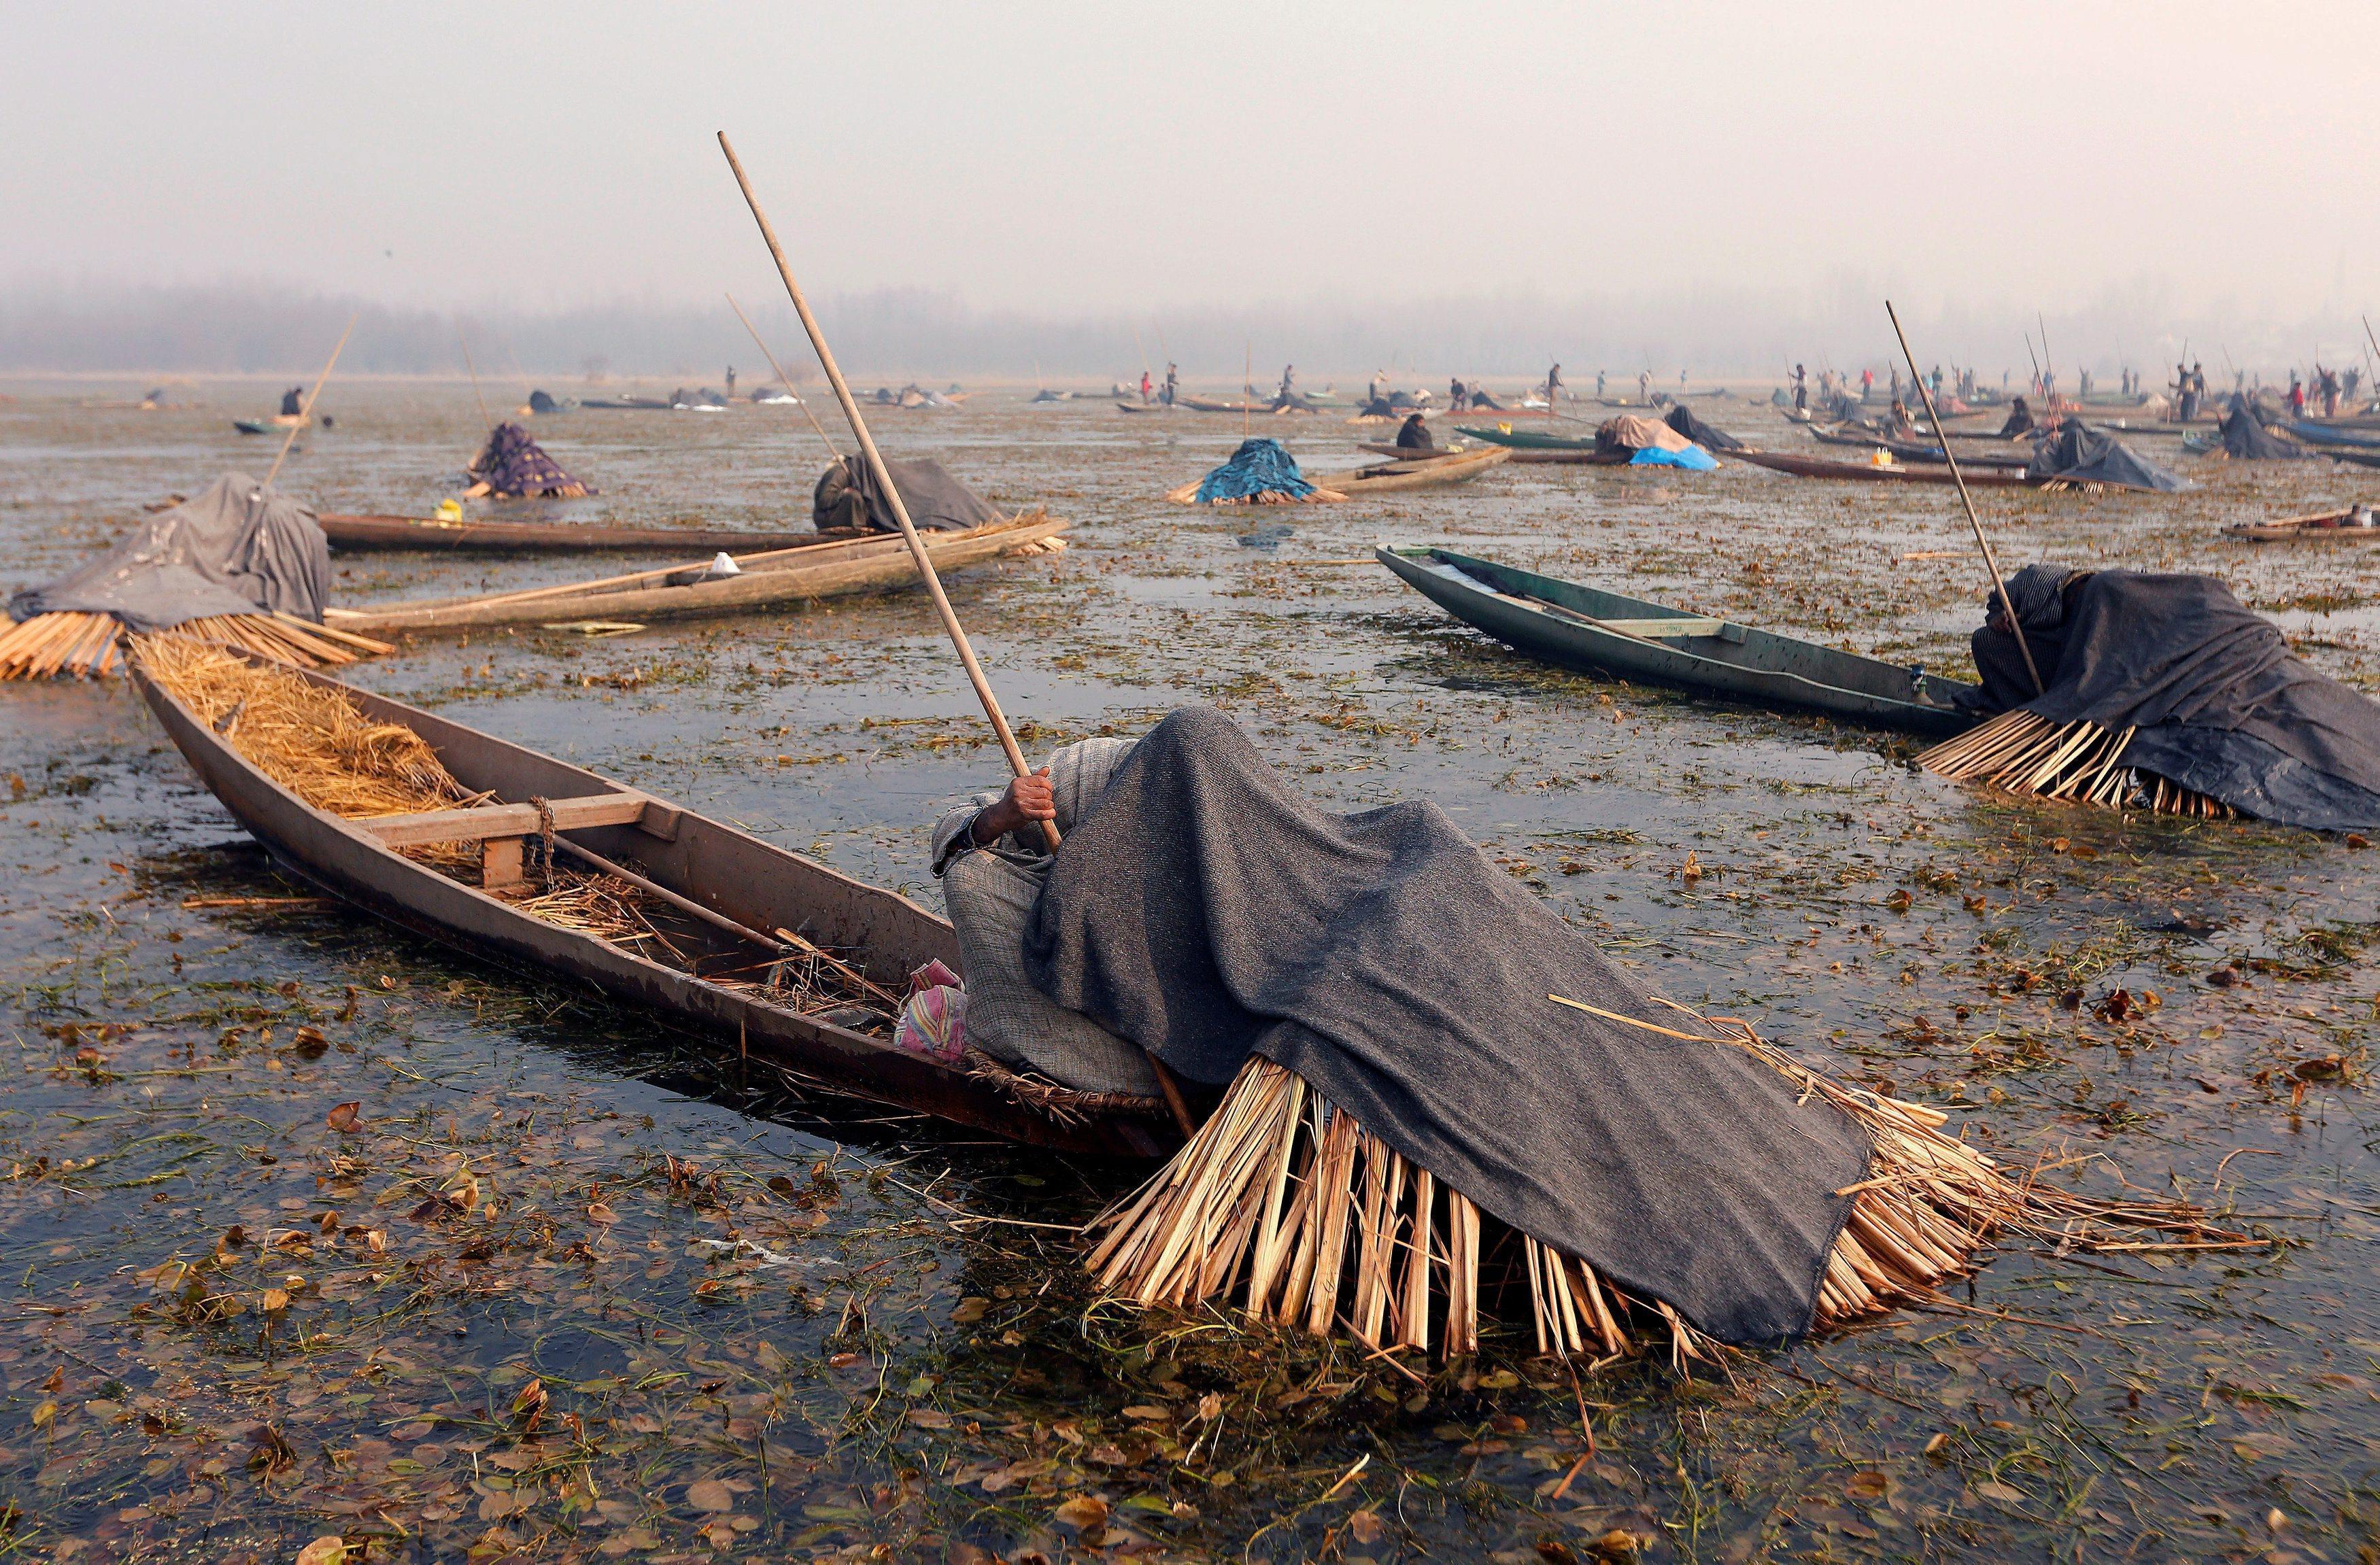 Fishermen cover their heads and part of their boats with blankets and straw as they wait to catch fi